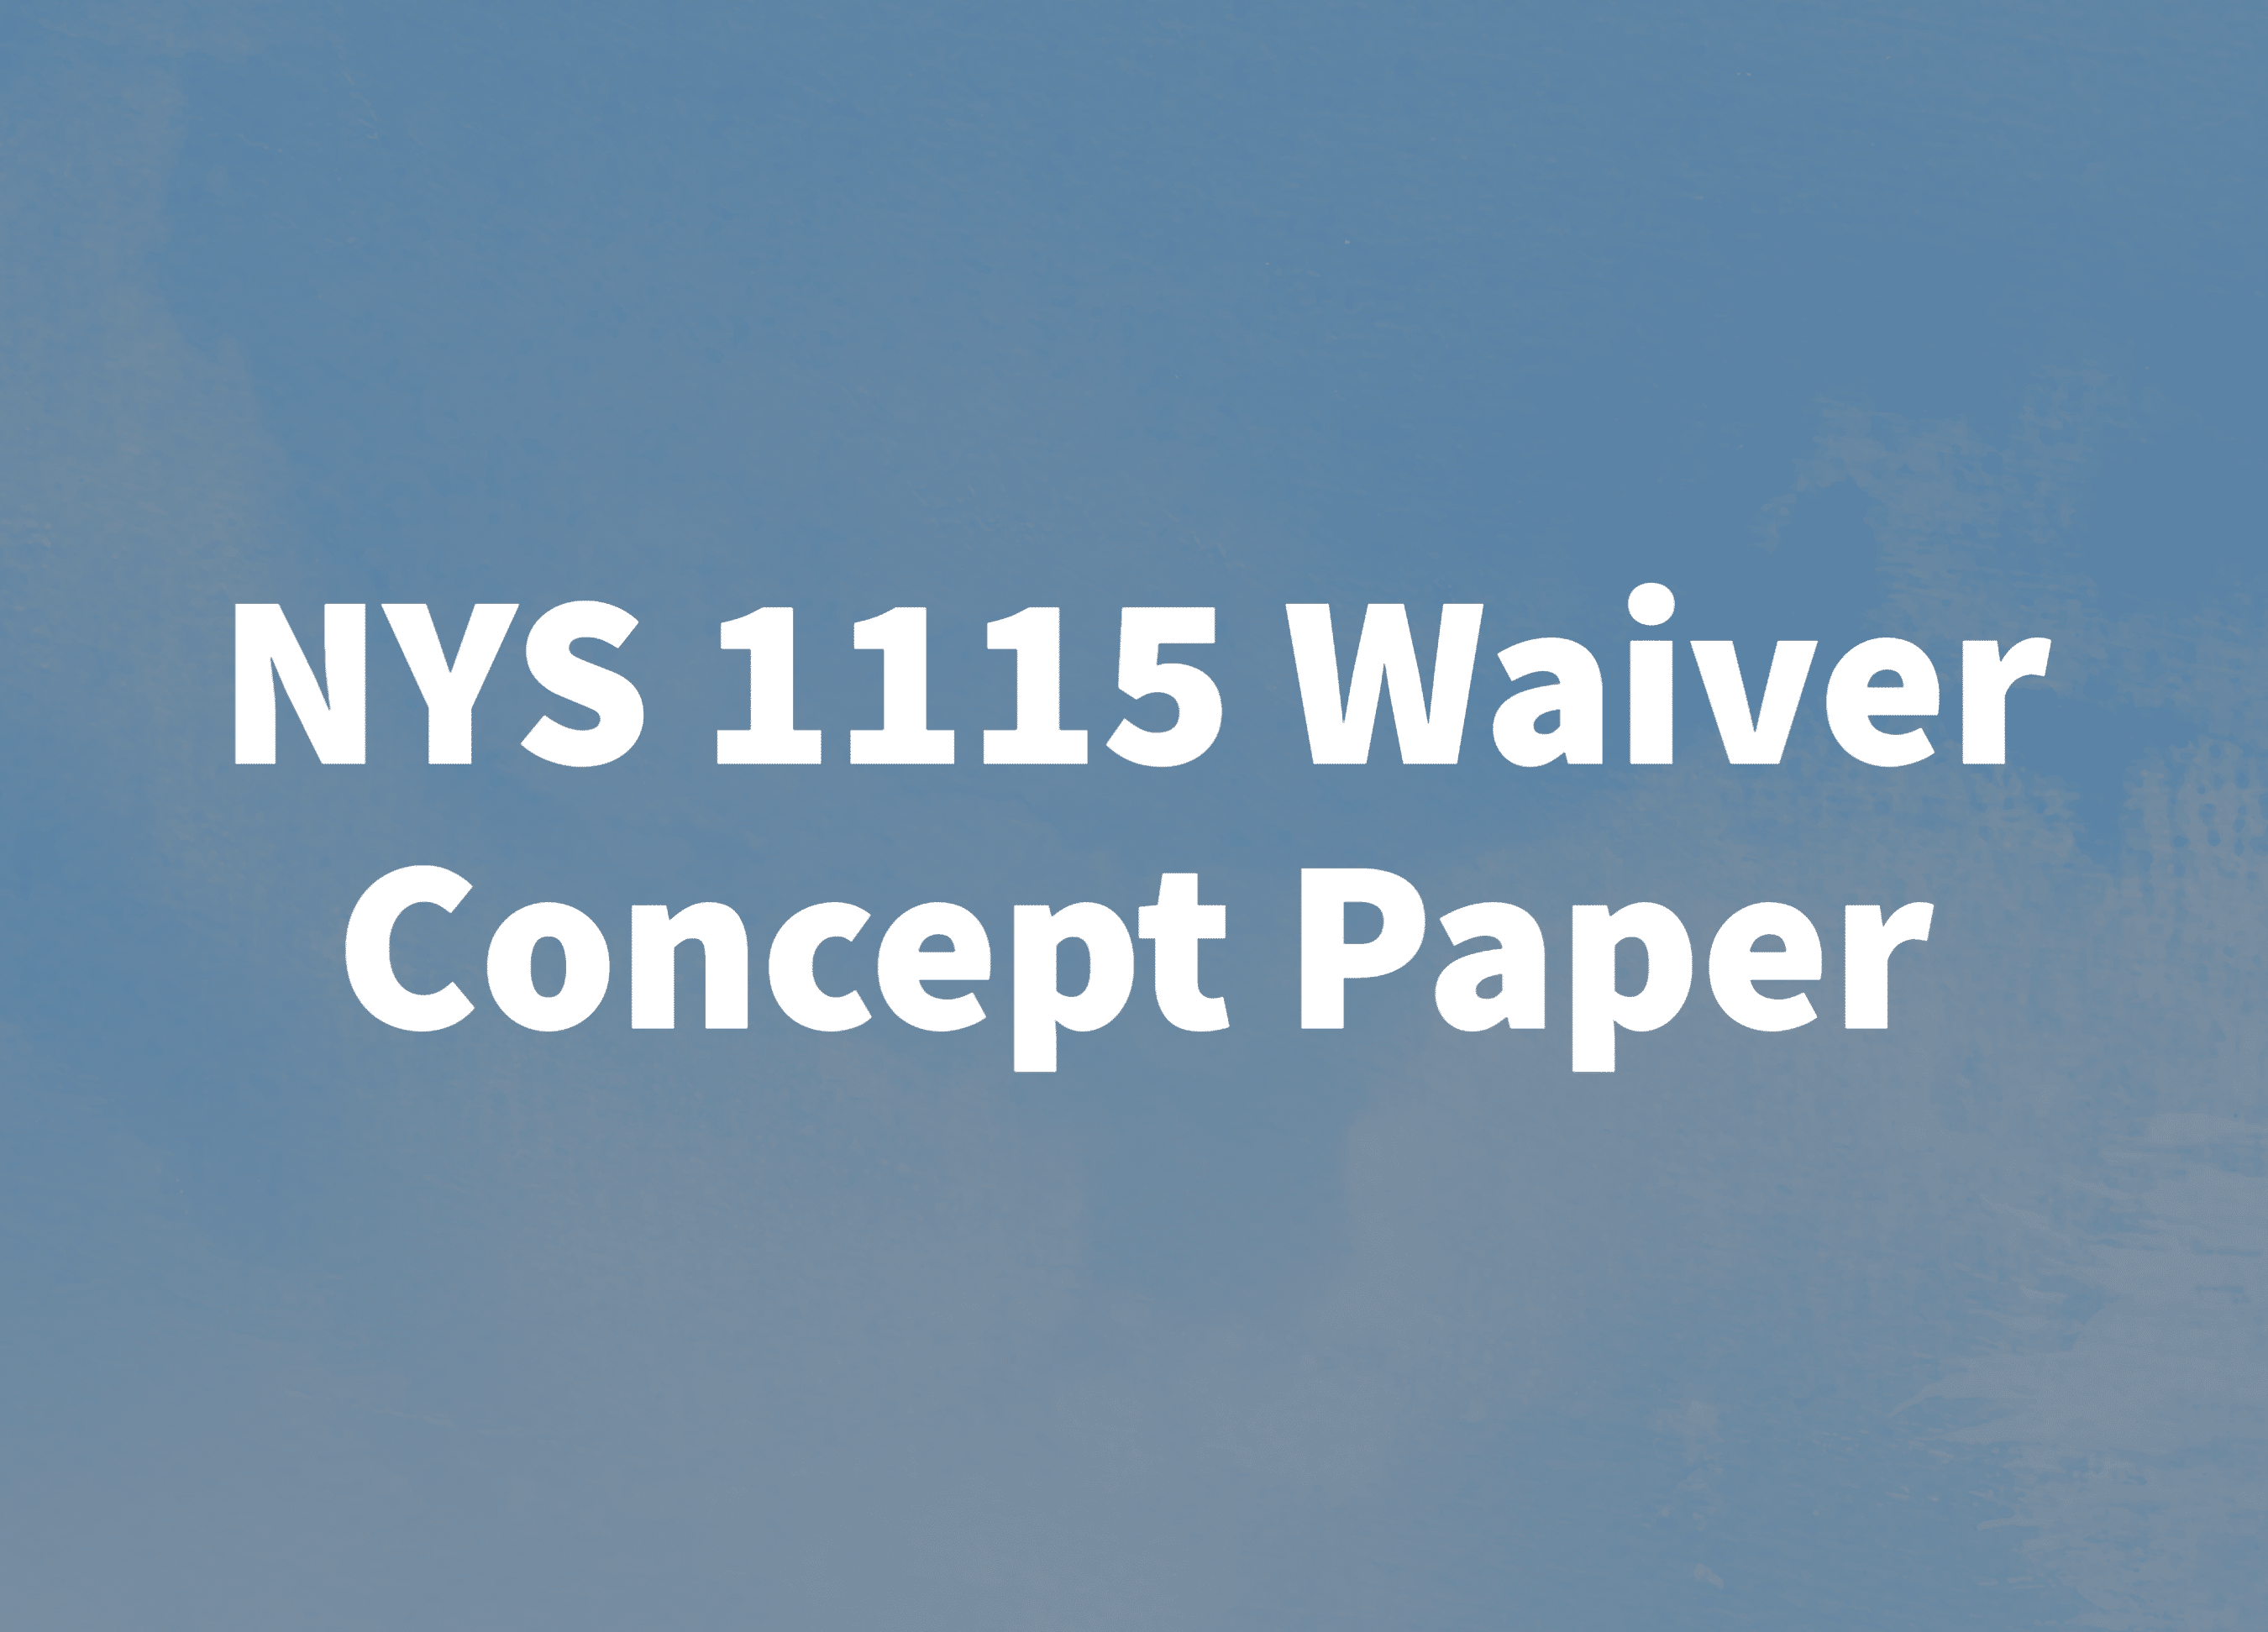 NYS 1115 Waiver Concept Paper: The Highlights